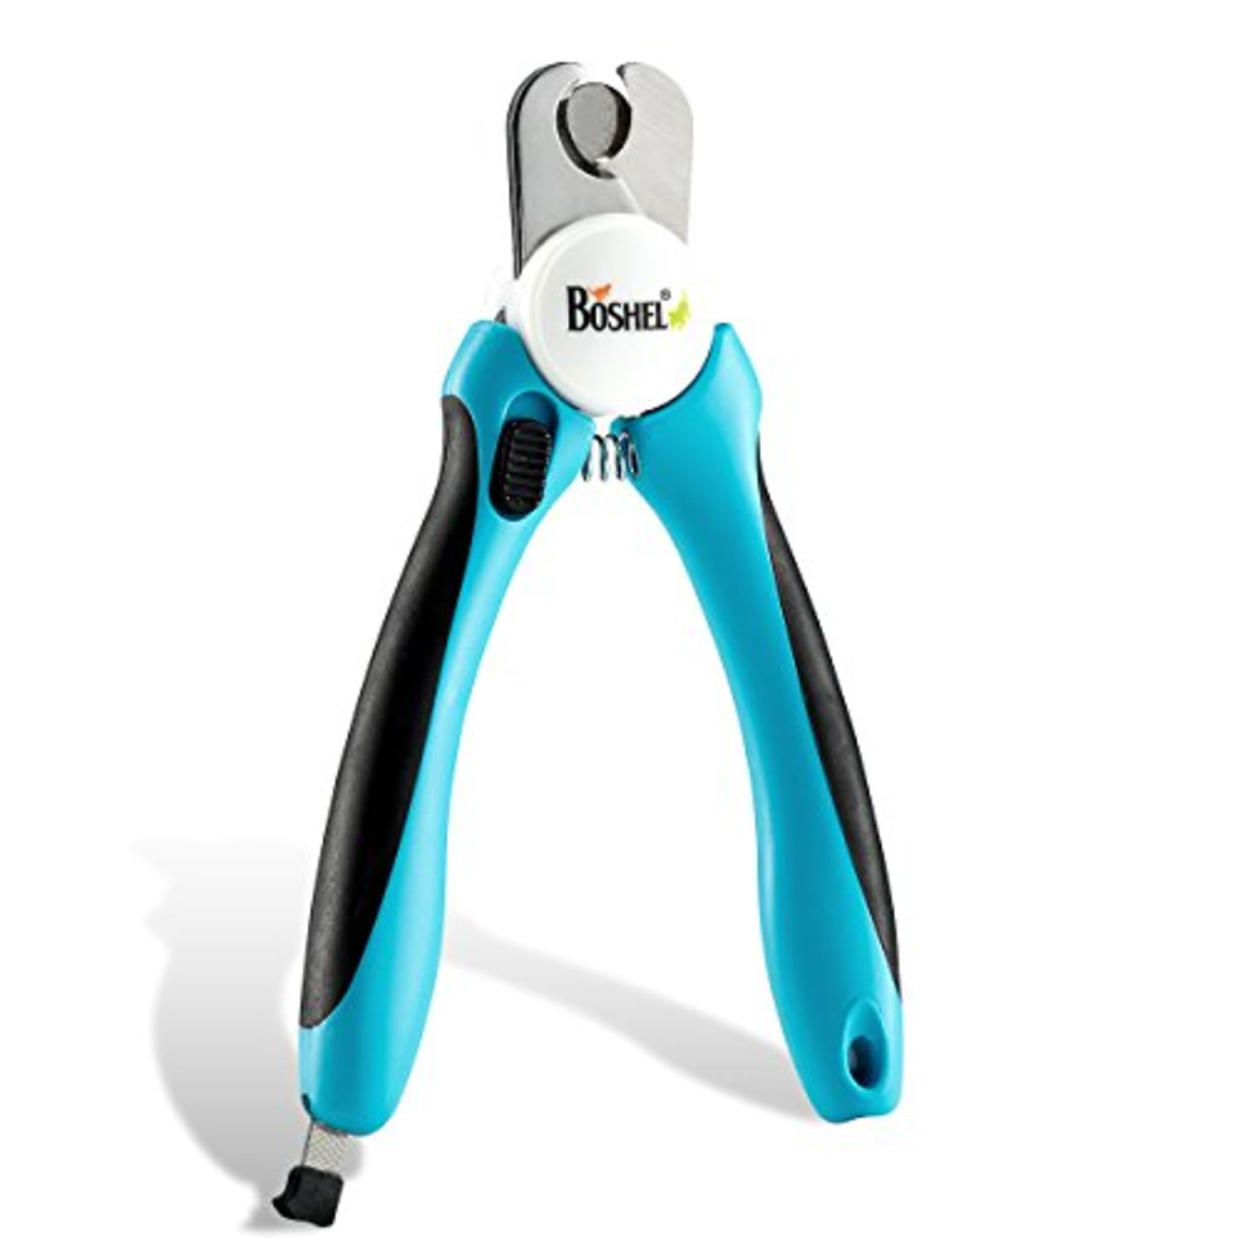 Boshel Dog Nail Clippers. 6 best dog nail trimmers of 2021 (Amazon / Amazon)